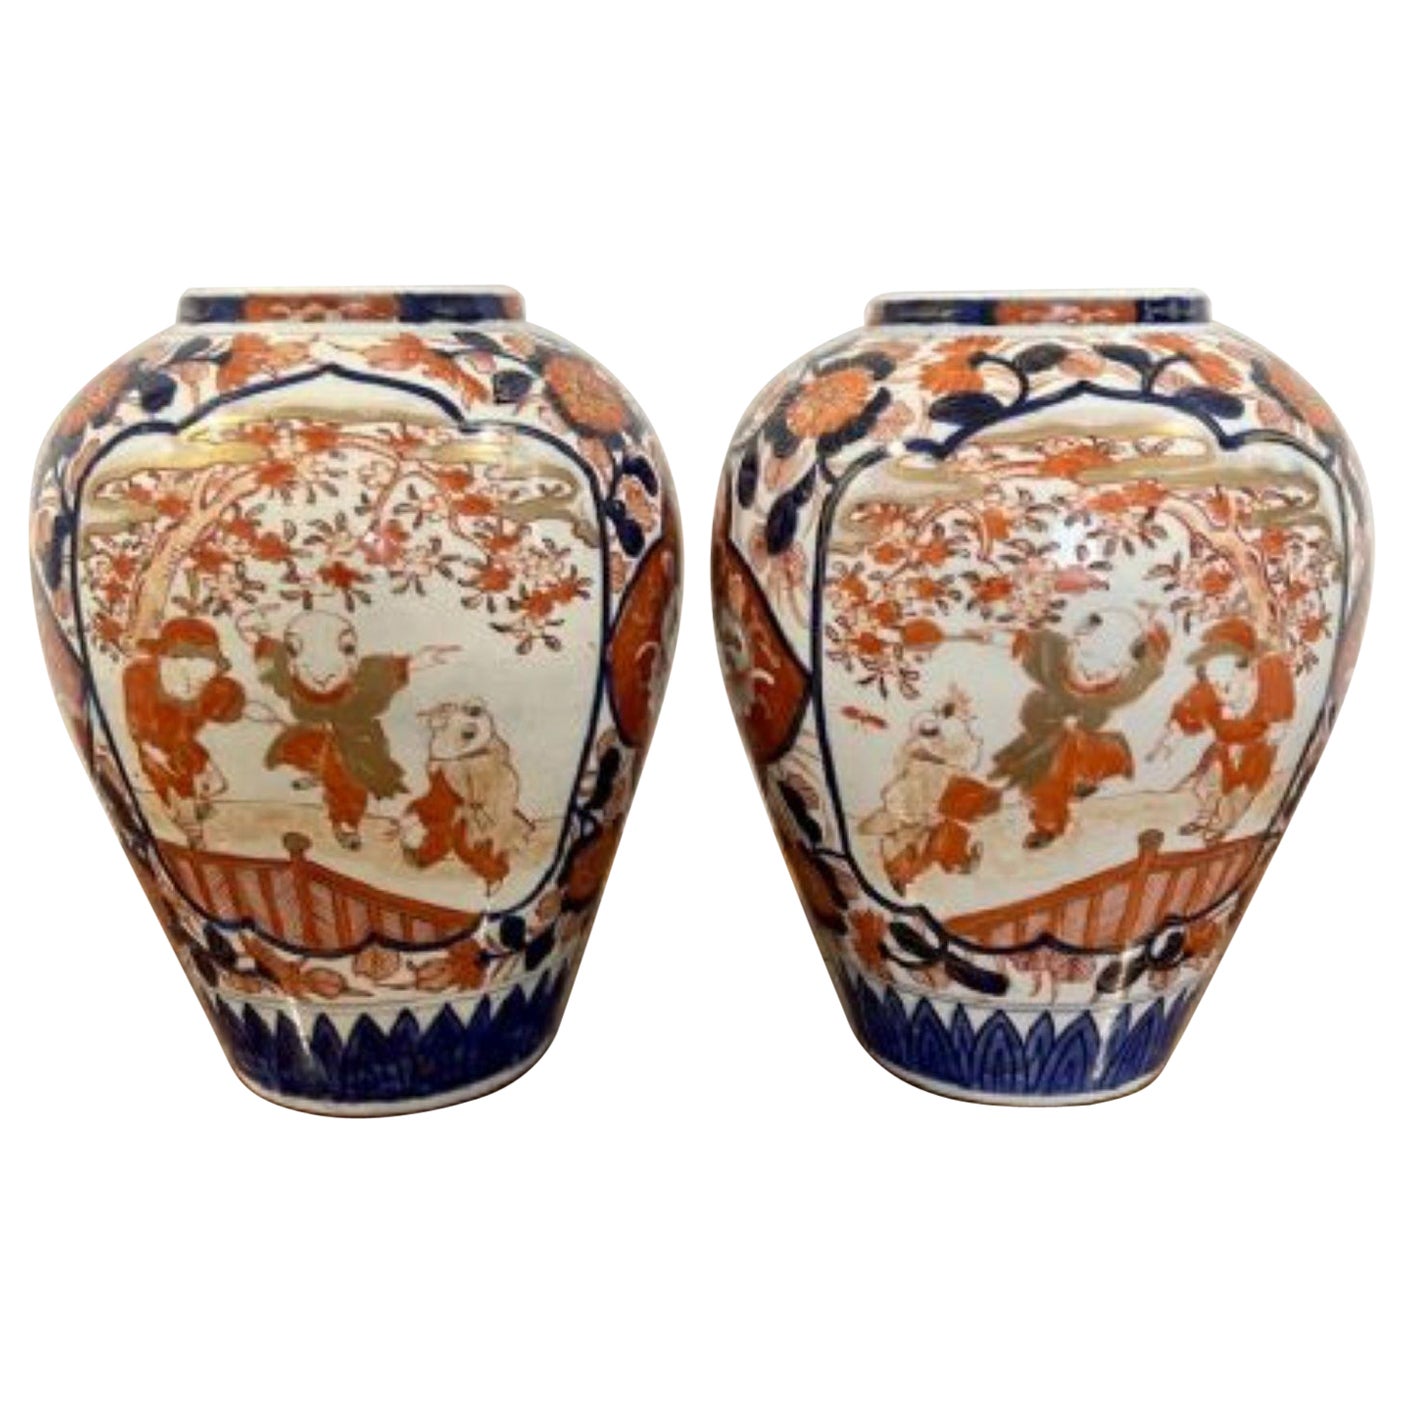 What is an Imari pattern?